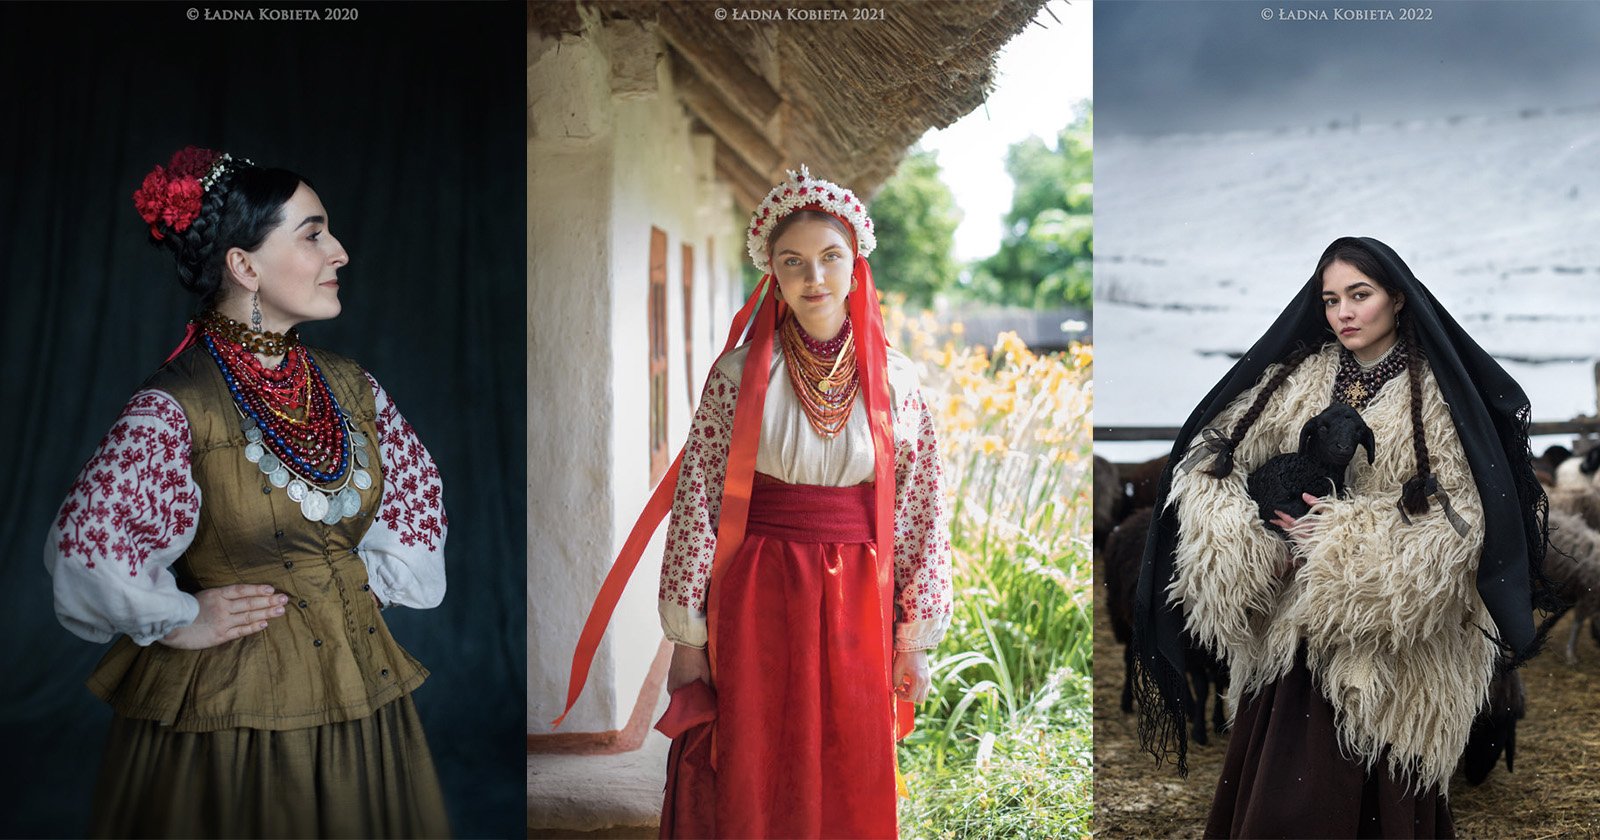 Ukrainian Photographer’s Ethnic Images Stand for What’s at Stake